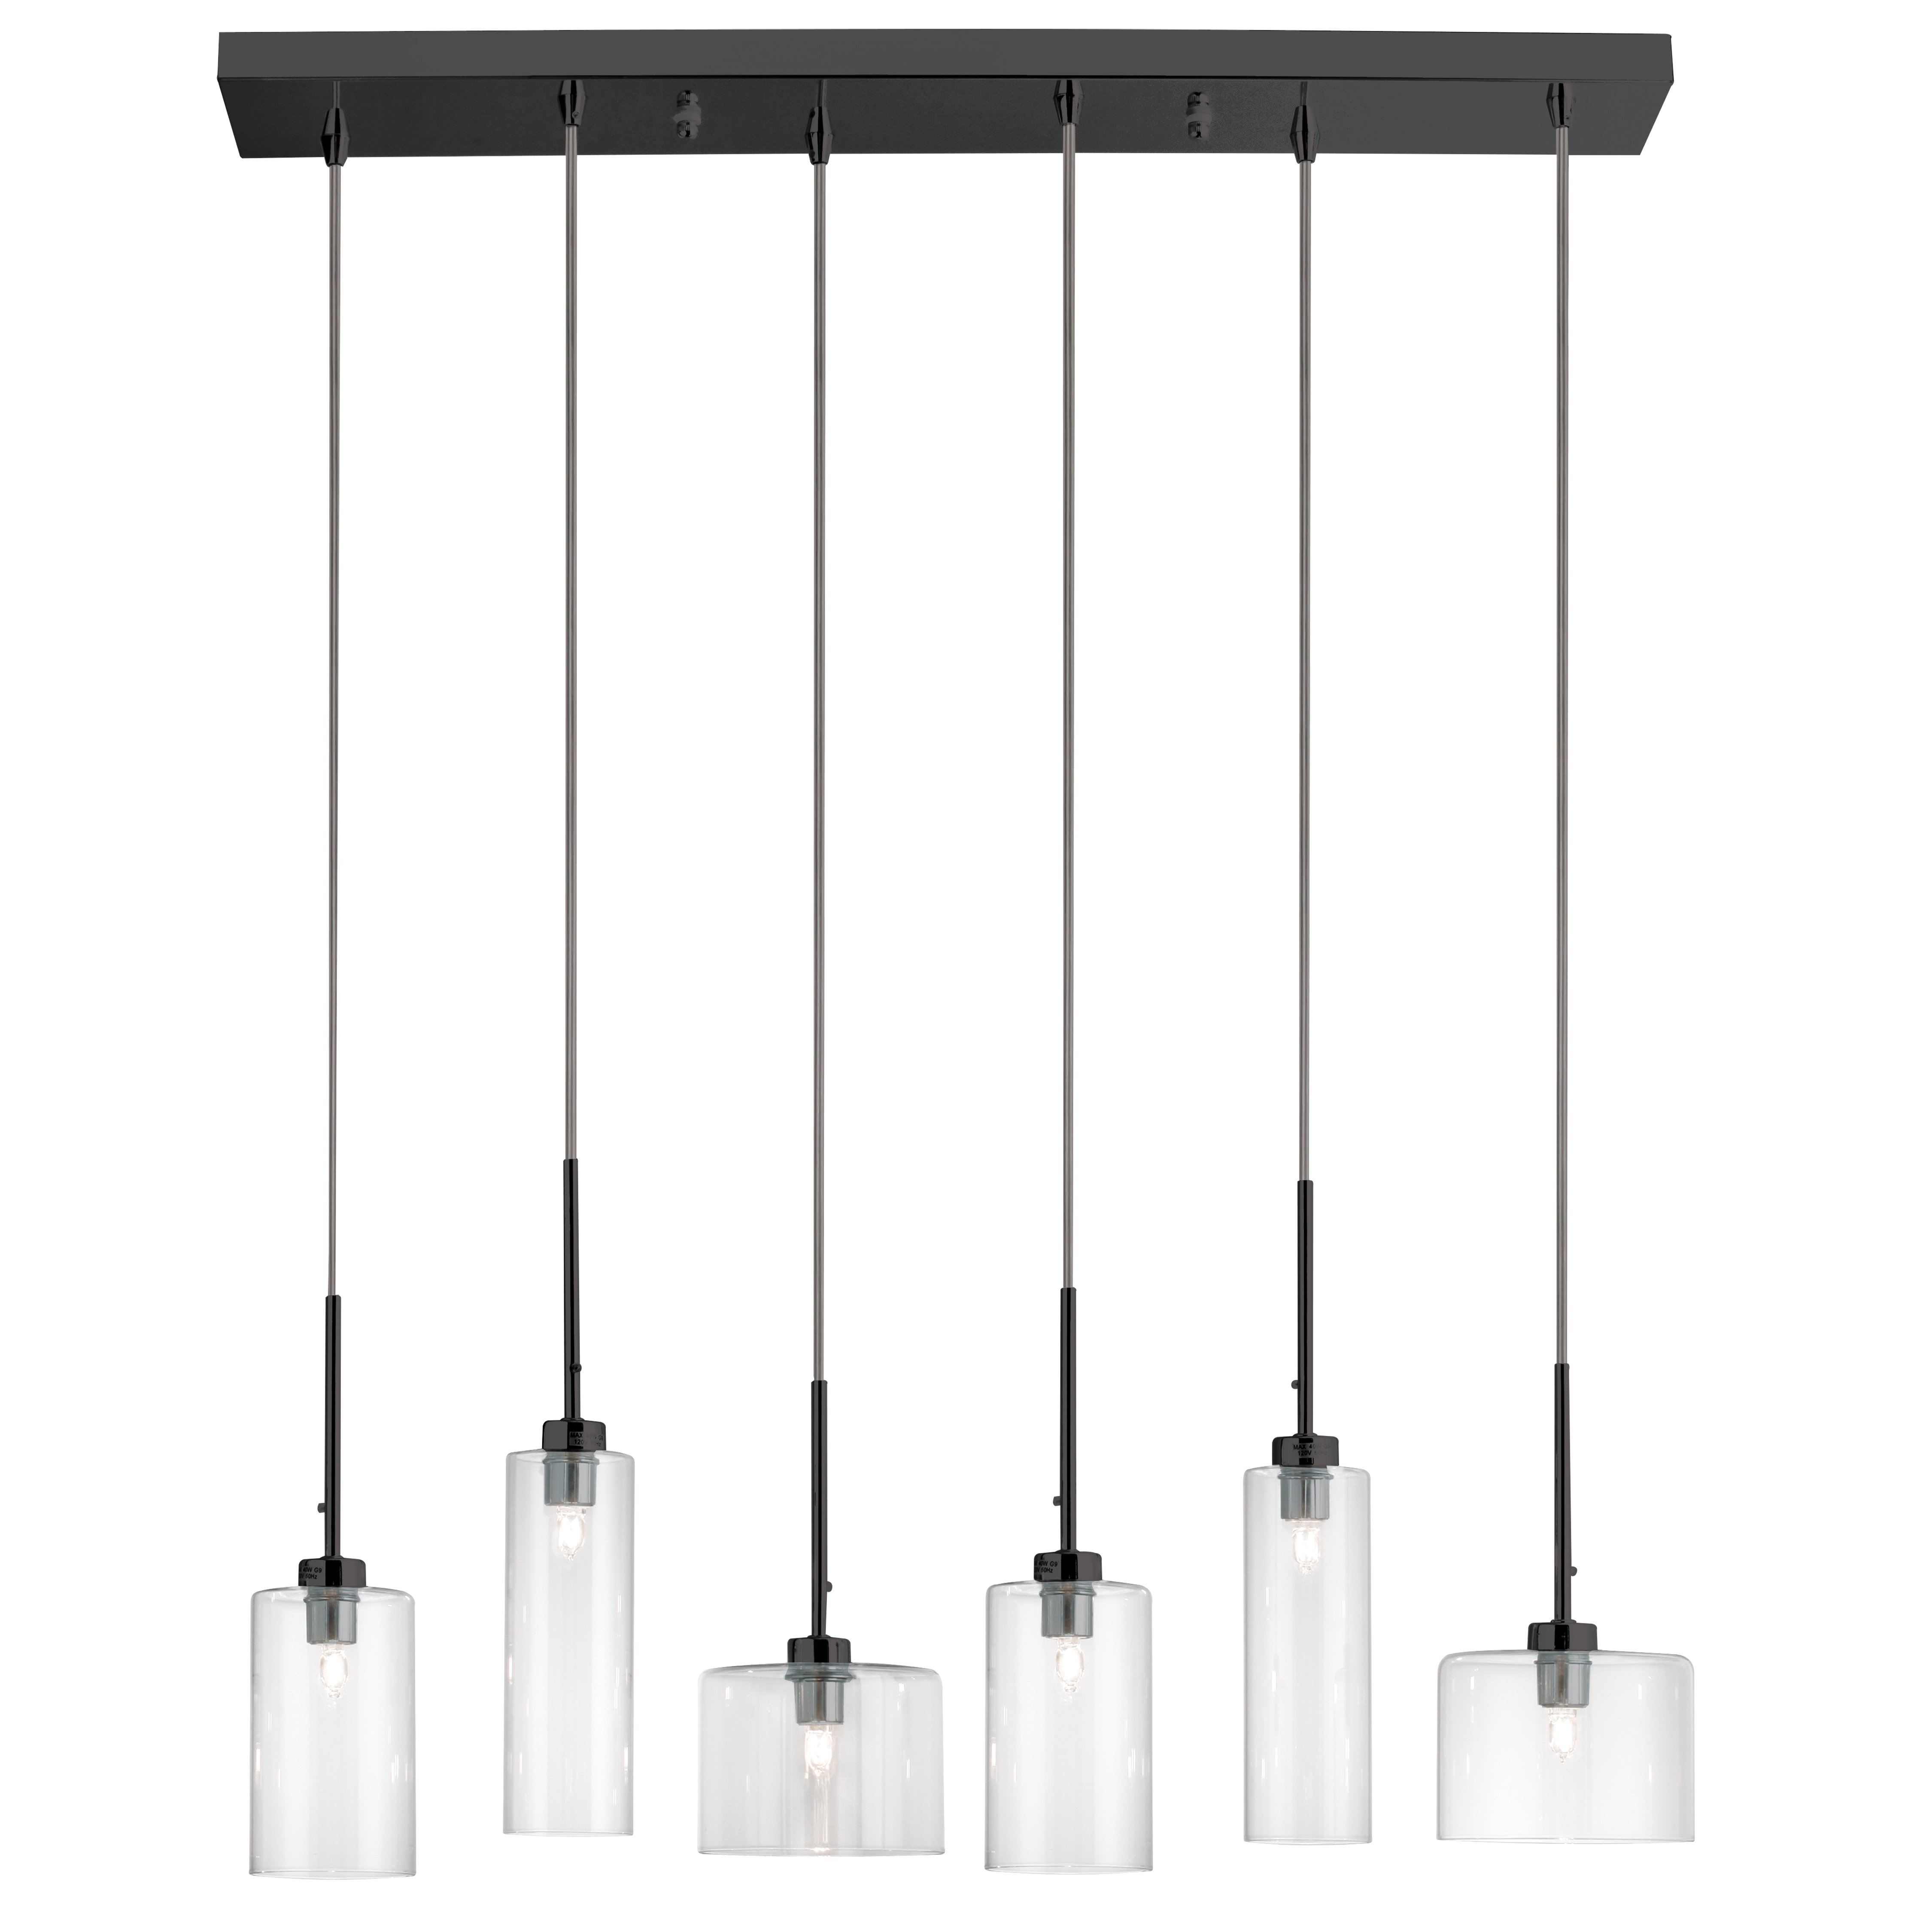 Industrial Chic  as the name implies, this family of lighting takes its design cues from the industrial world even as its sense of aesthetic could come from any couture house. These bold pendant lights will make a noticeable statement no matter what other furnishings the room may hold.  The Industrial Chic line comes in a choice of rounded ball or tubular styles and fashionable combinations of satin chrome and/or matte black with clear silver or black textile cords. They bring a note of ultra-modern design that can enhance or blend in with existing décor schemes but will always draw attention.